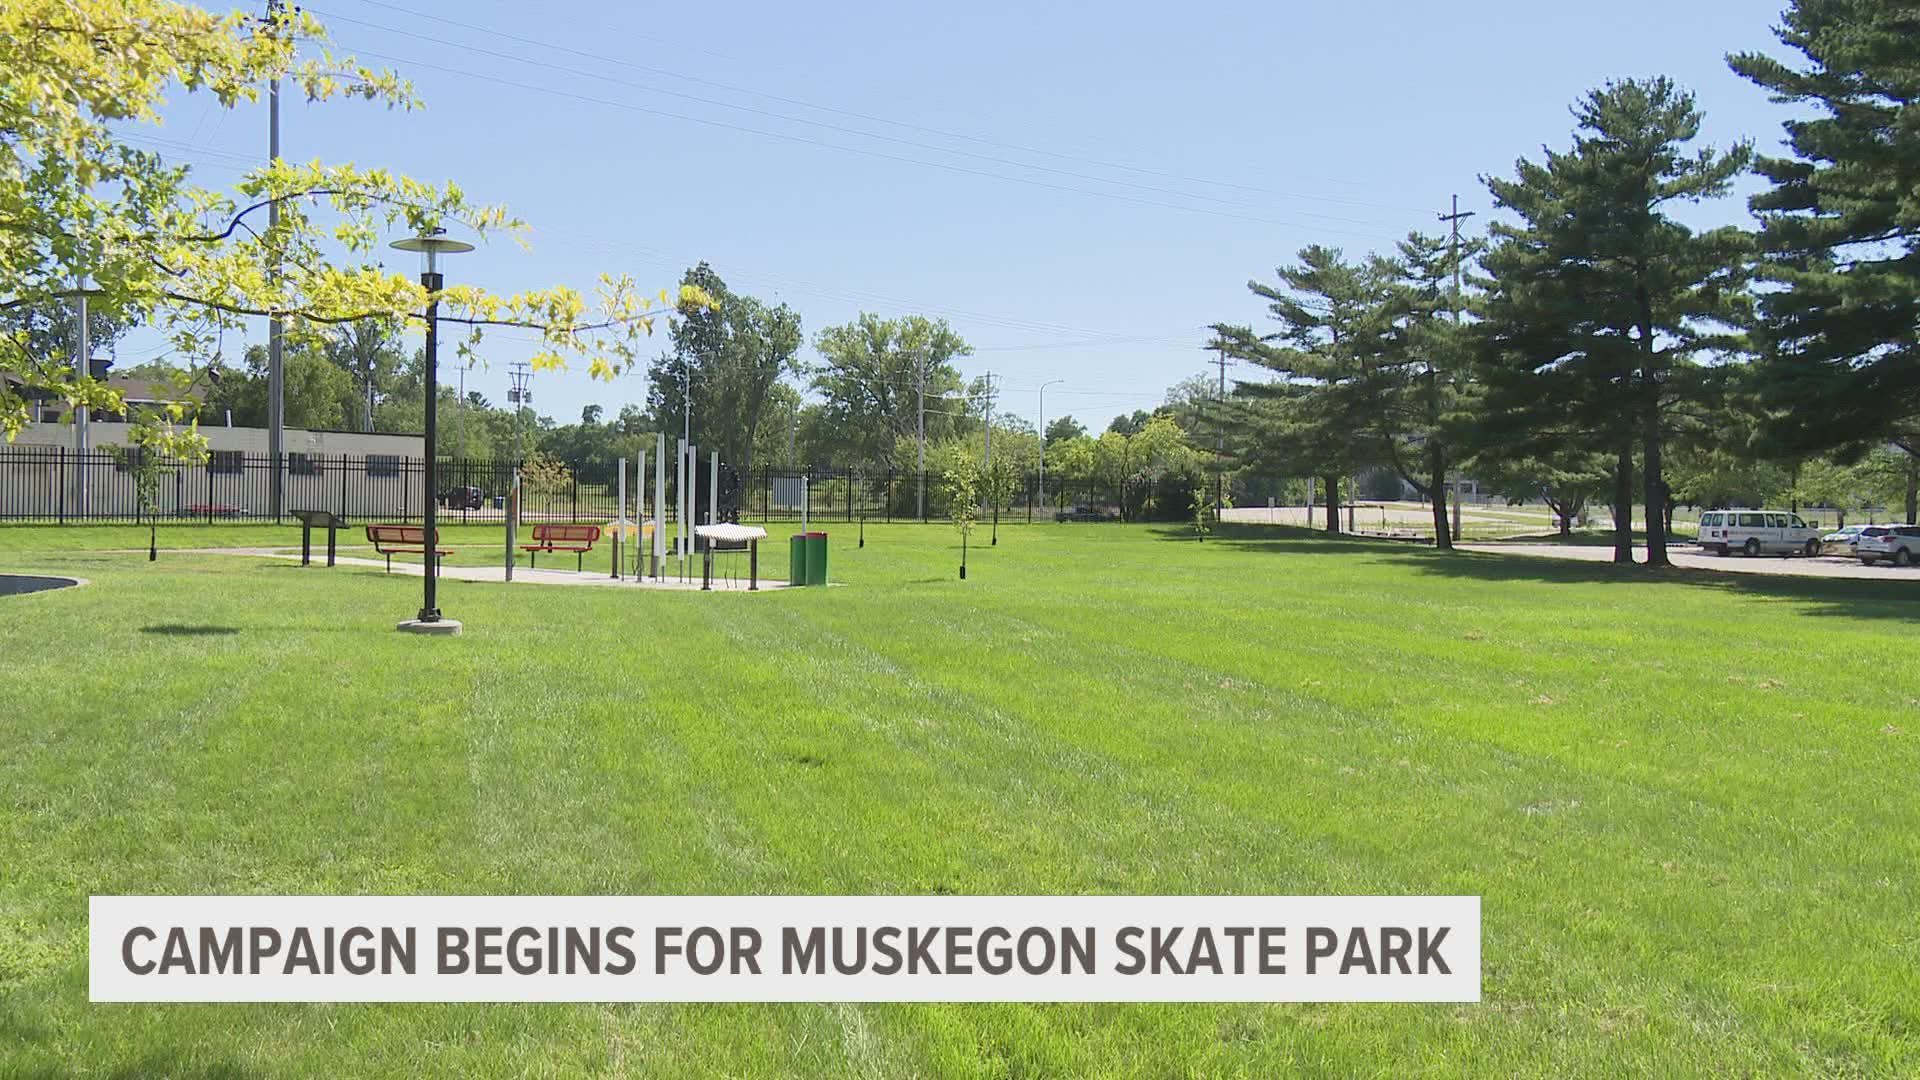 Organizers are trying to apply the lessons learned from Seyferth Skate Park, which opened about 20 years ago and has since been largely abandoned.